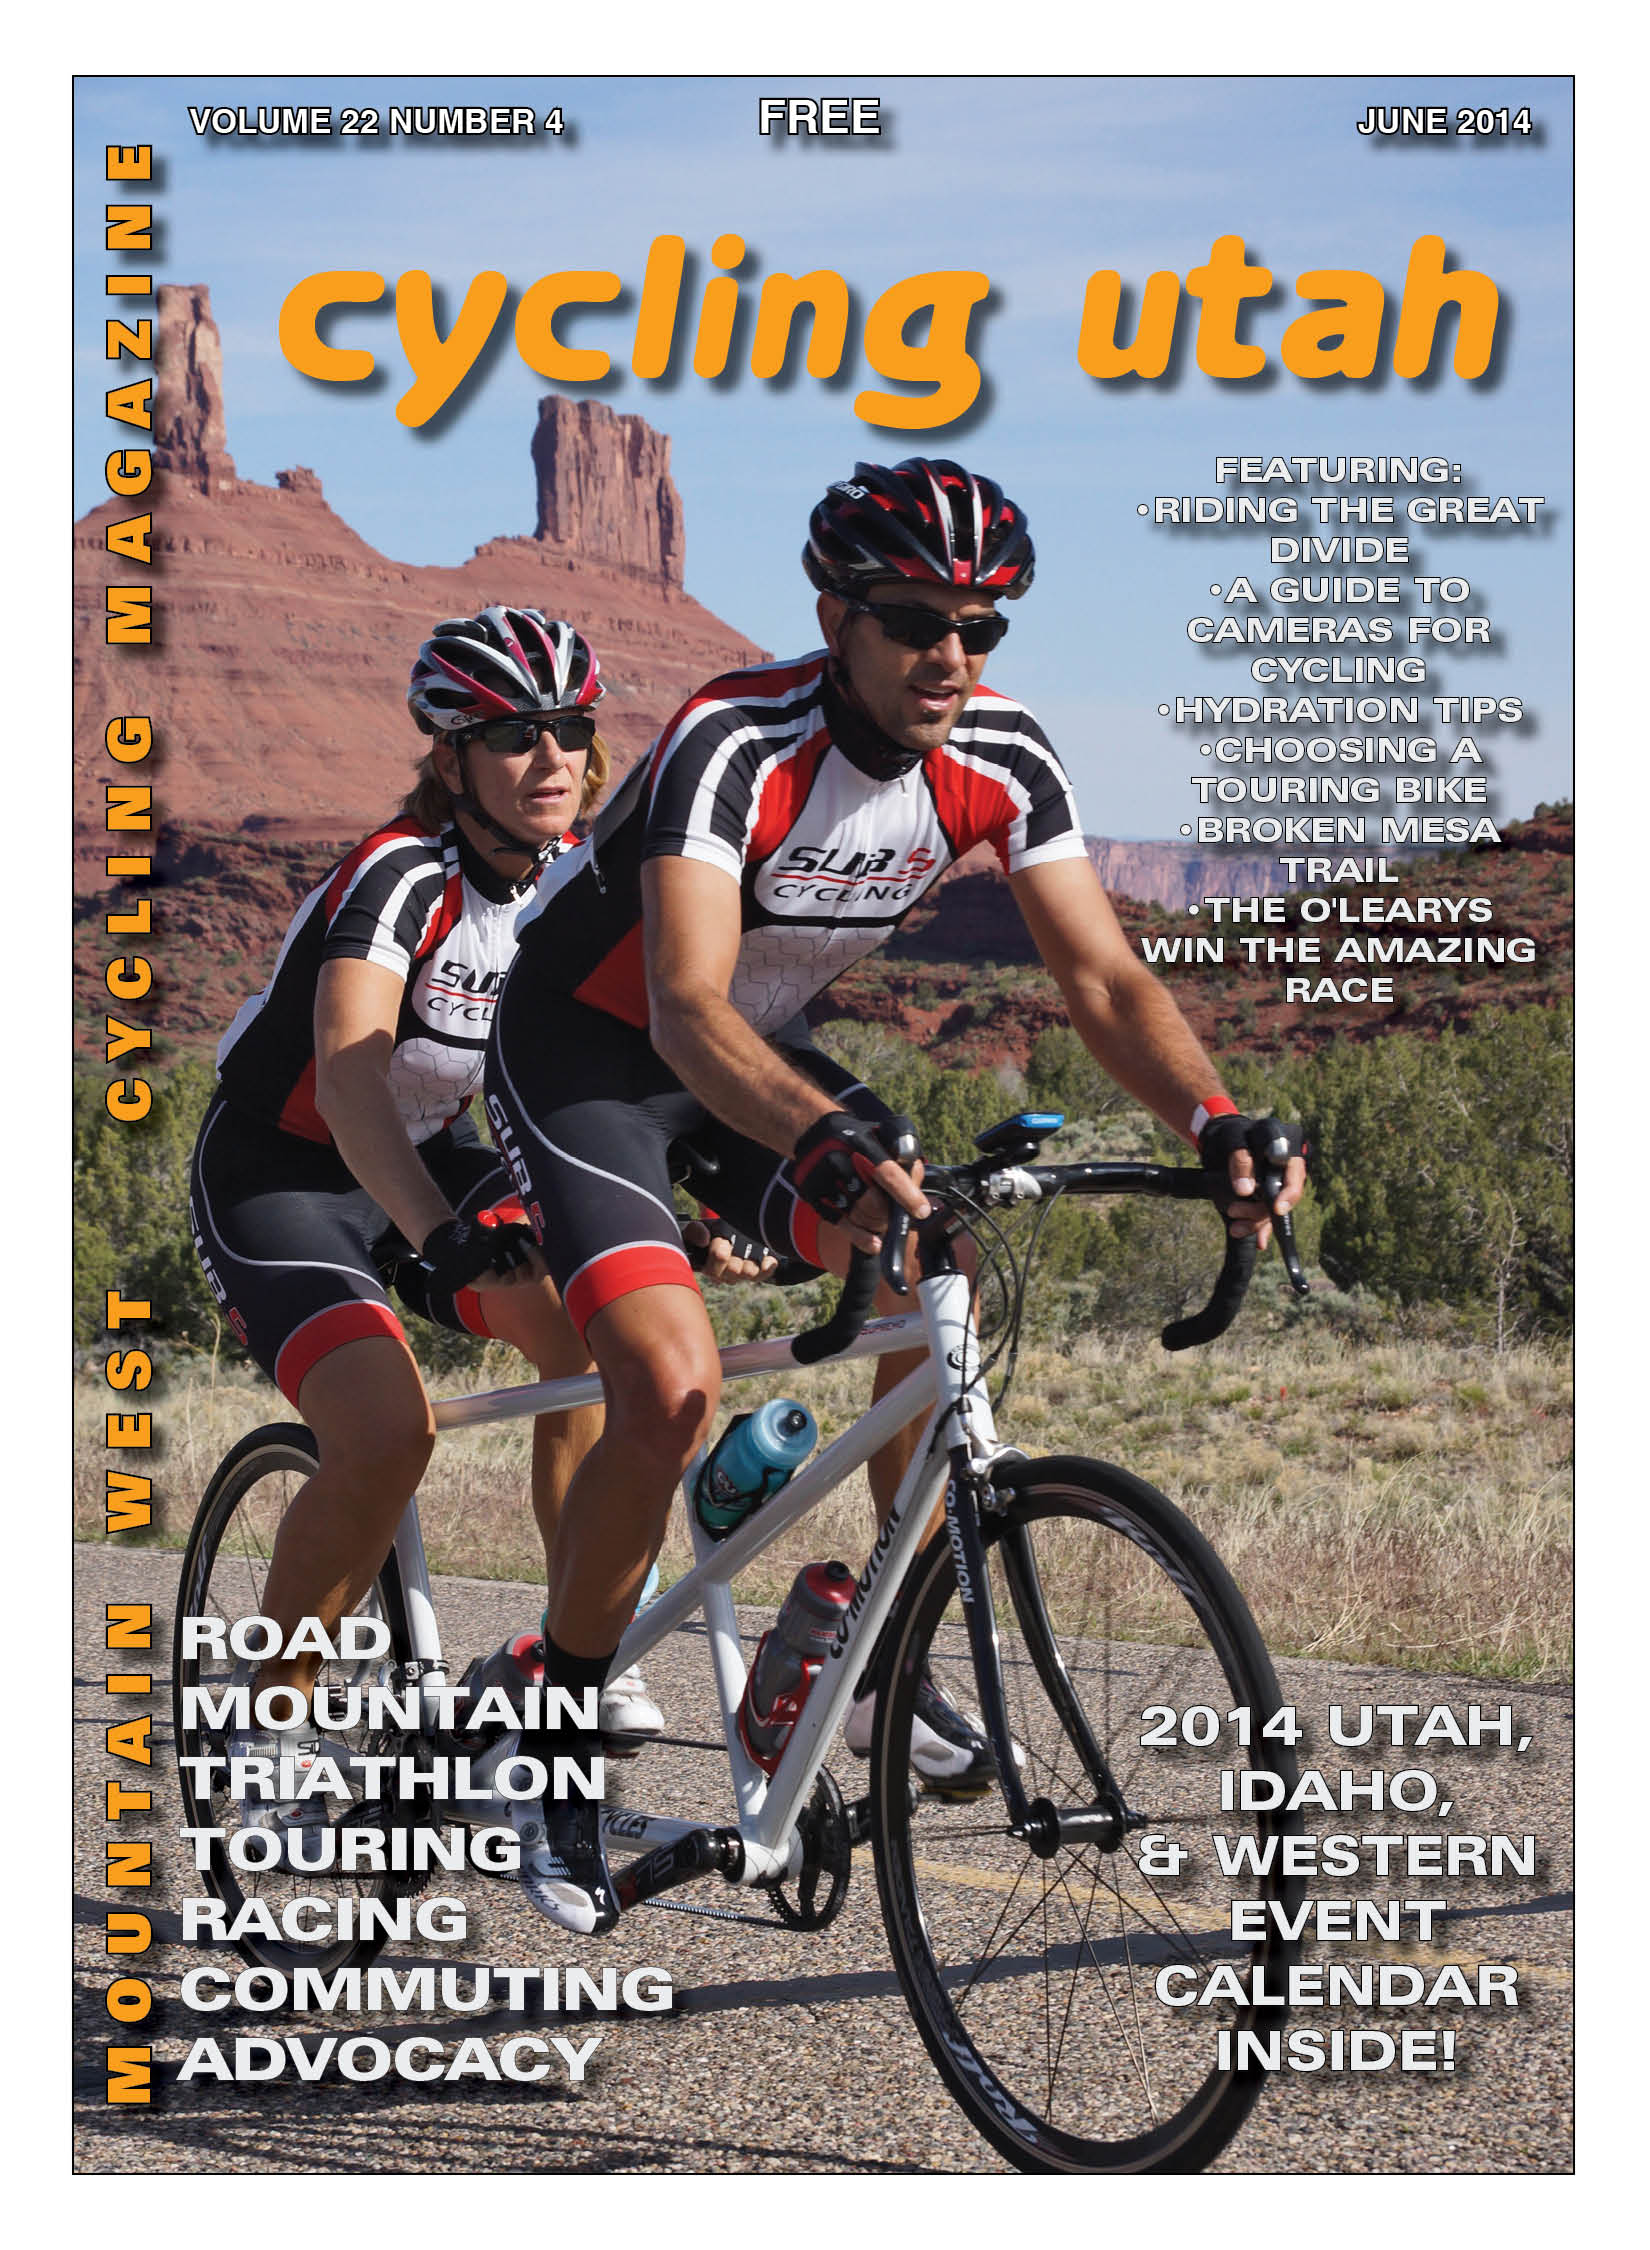 Cycling Utah’s June 2014 Issue is Now Available!